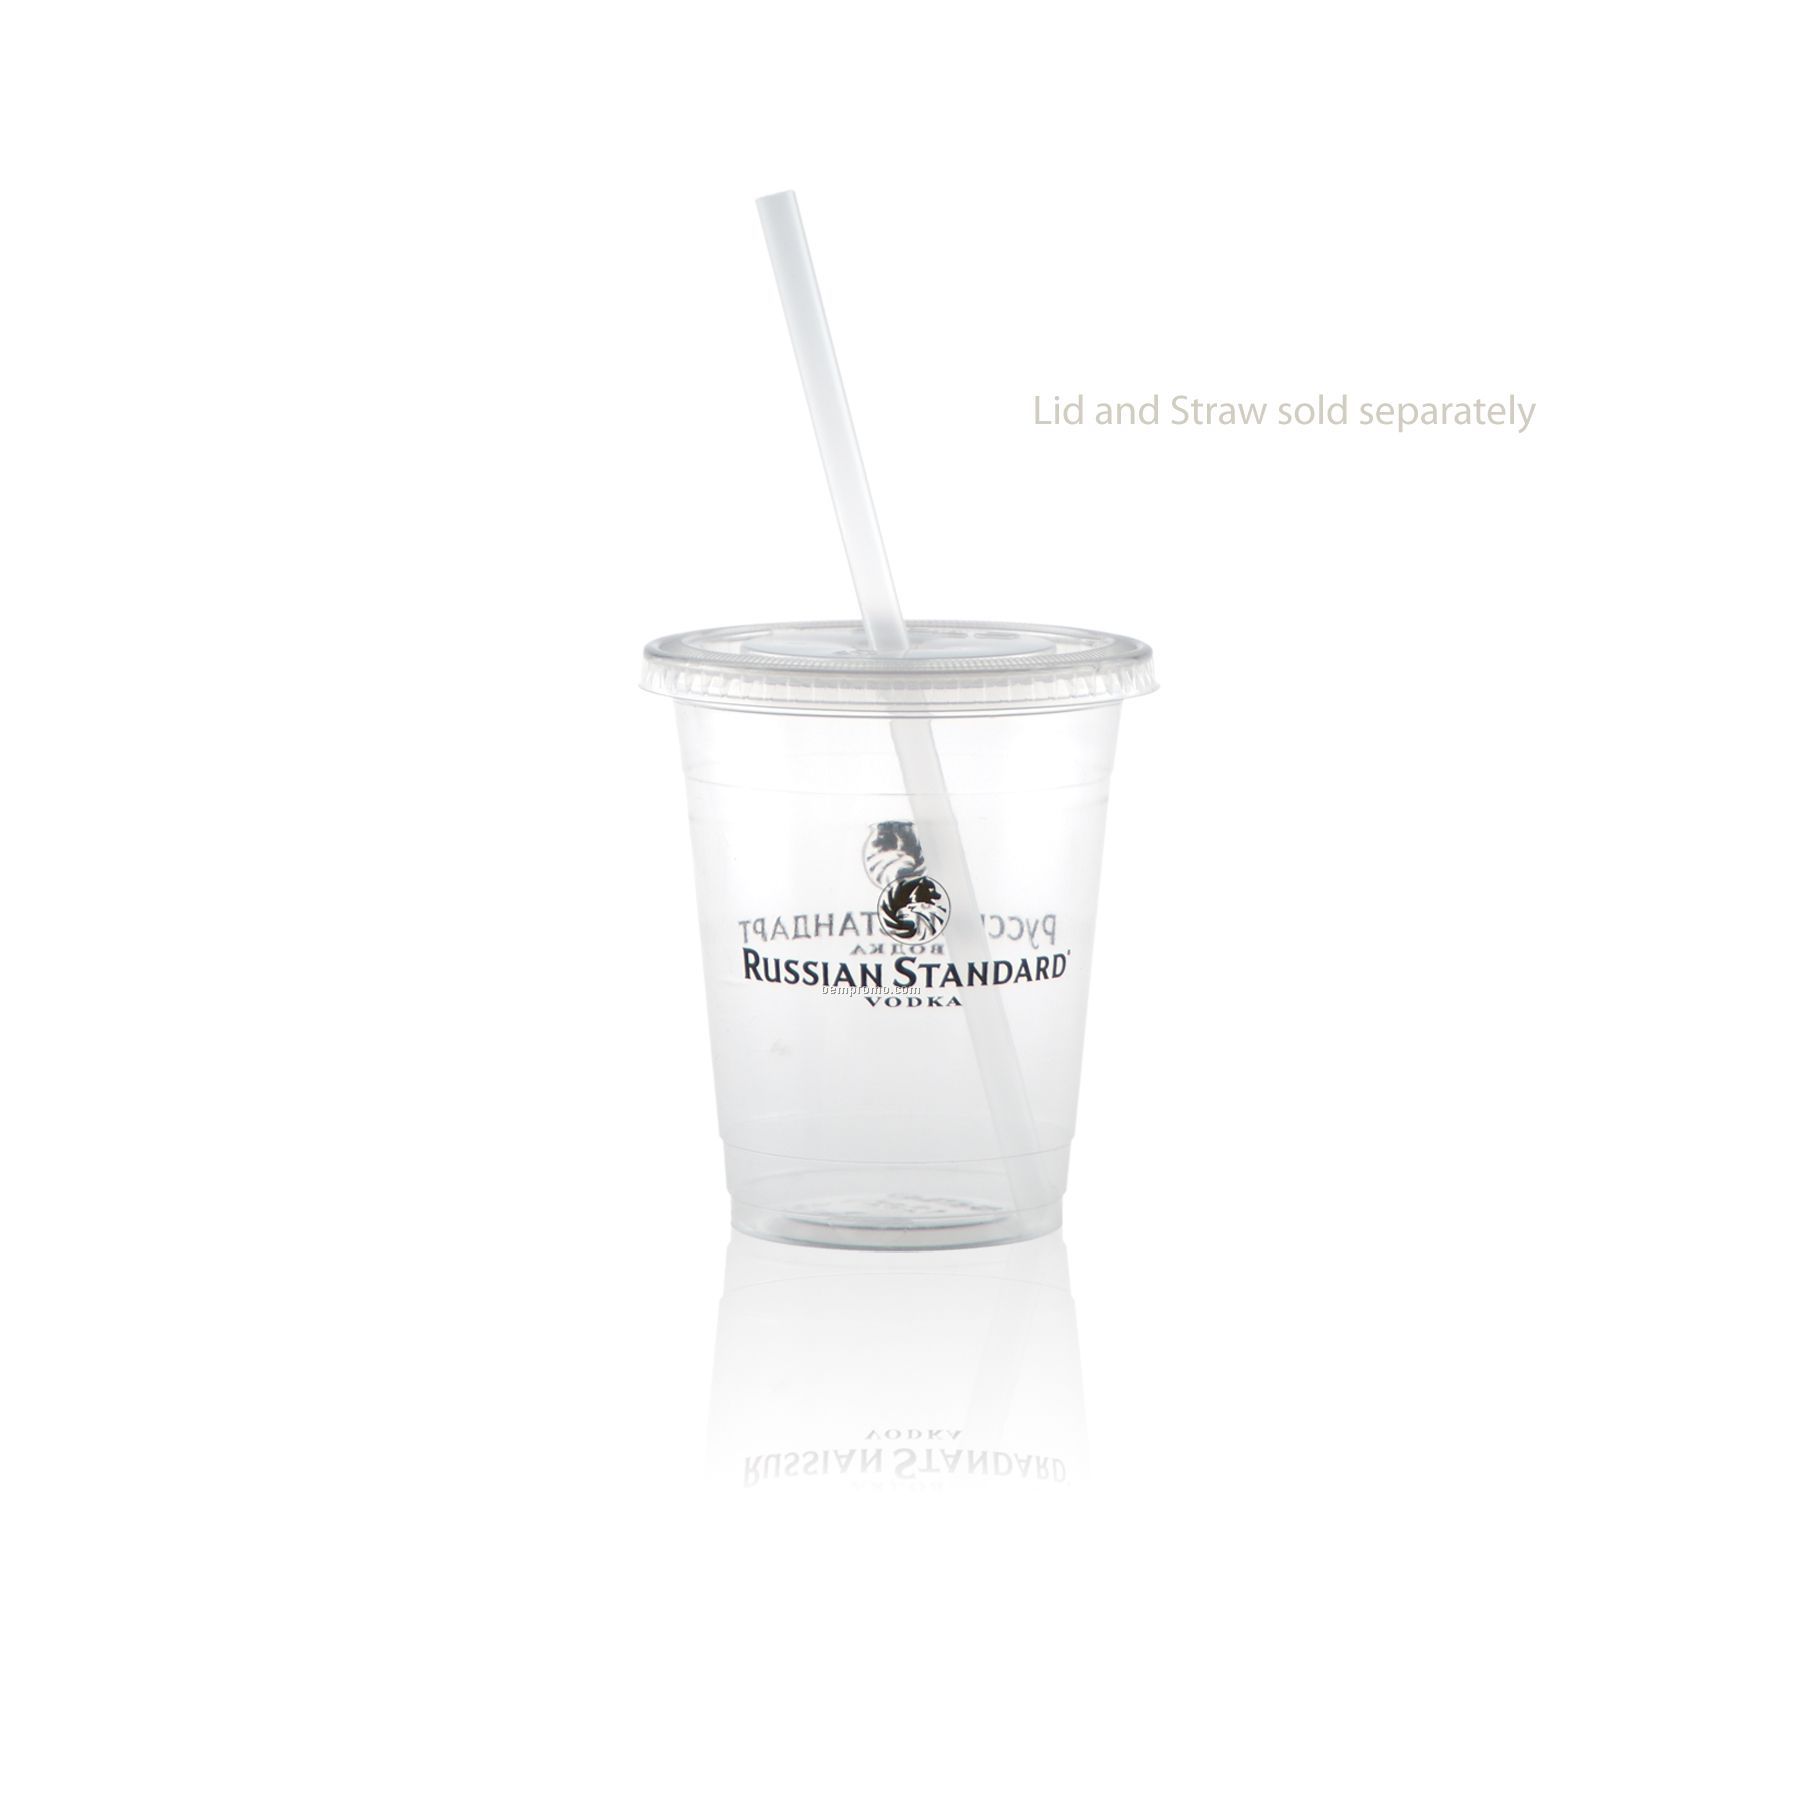 12/14 Oz. Soft Sided Clear Cup